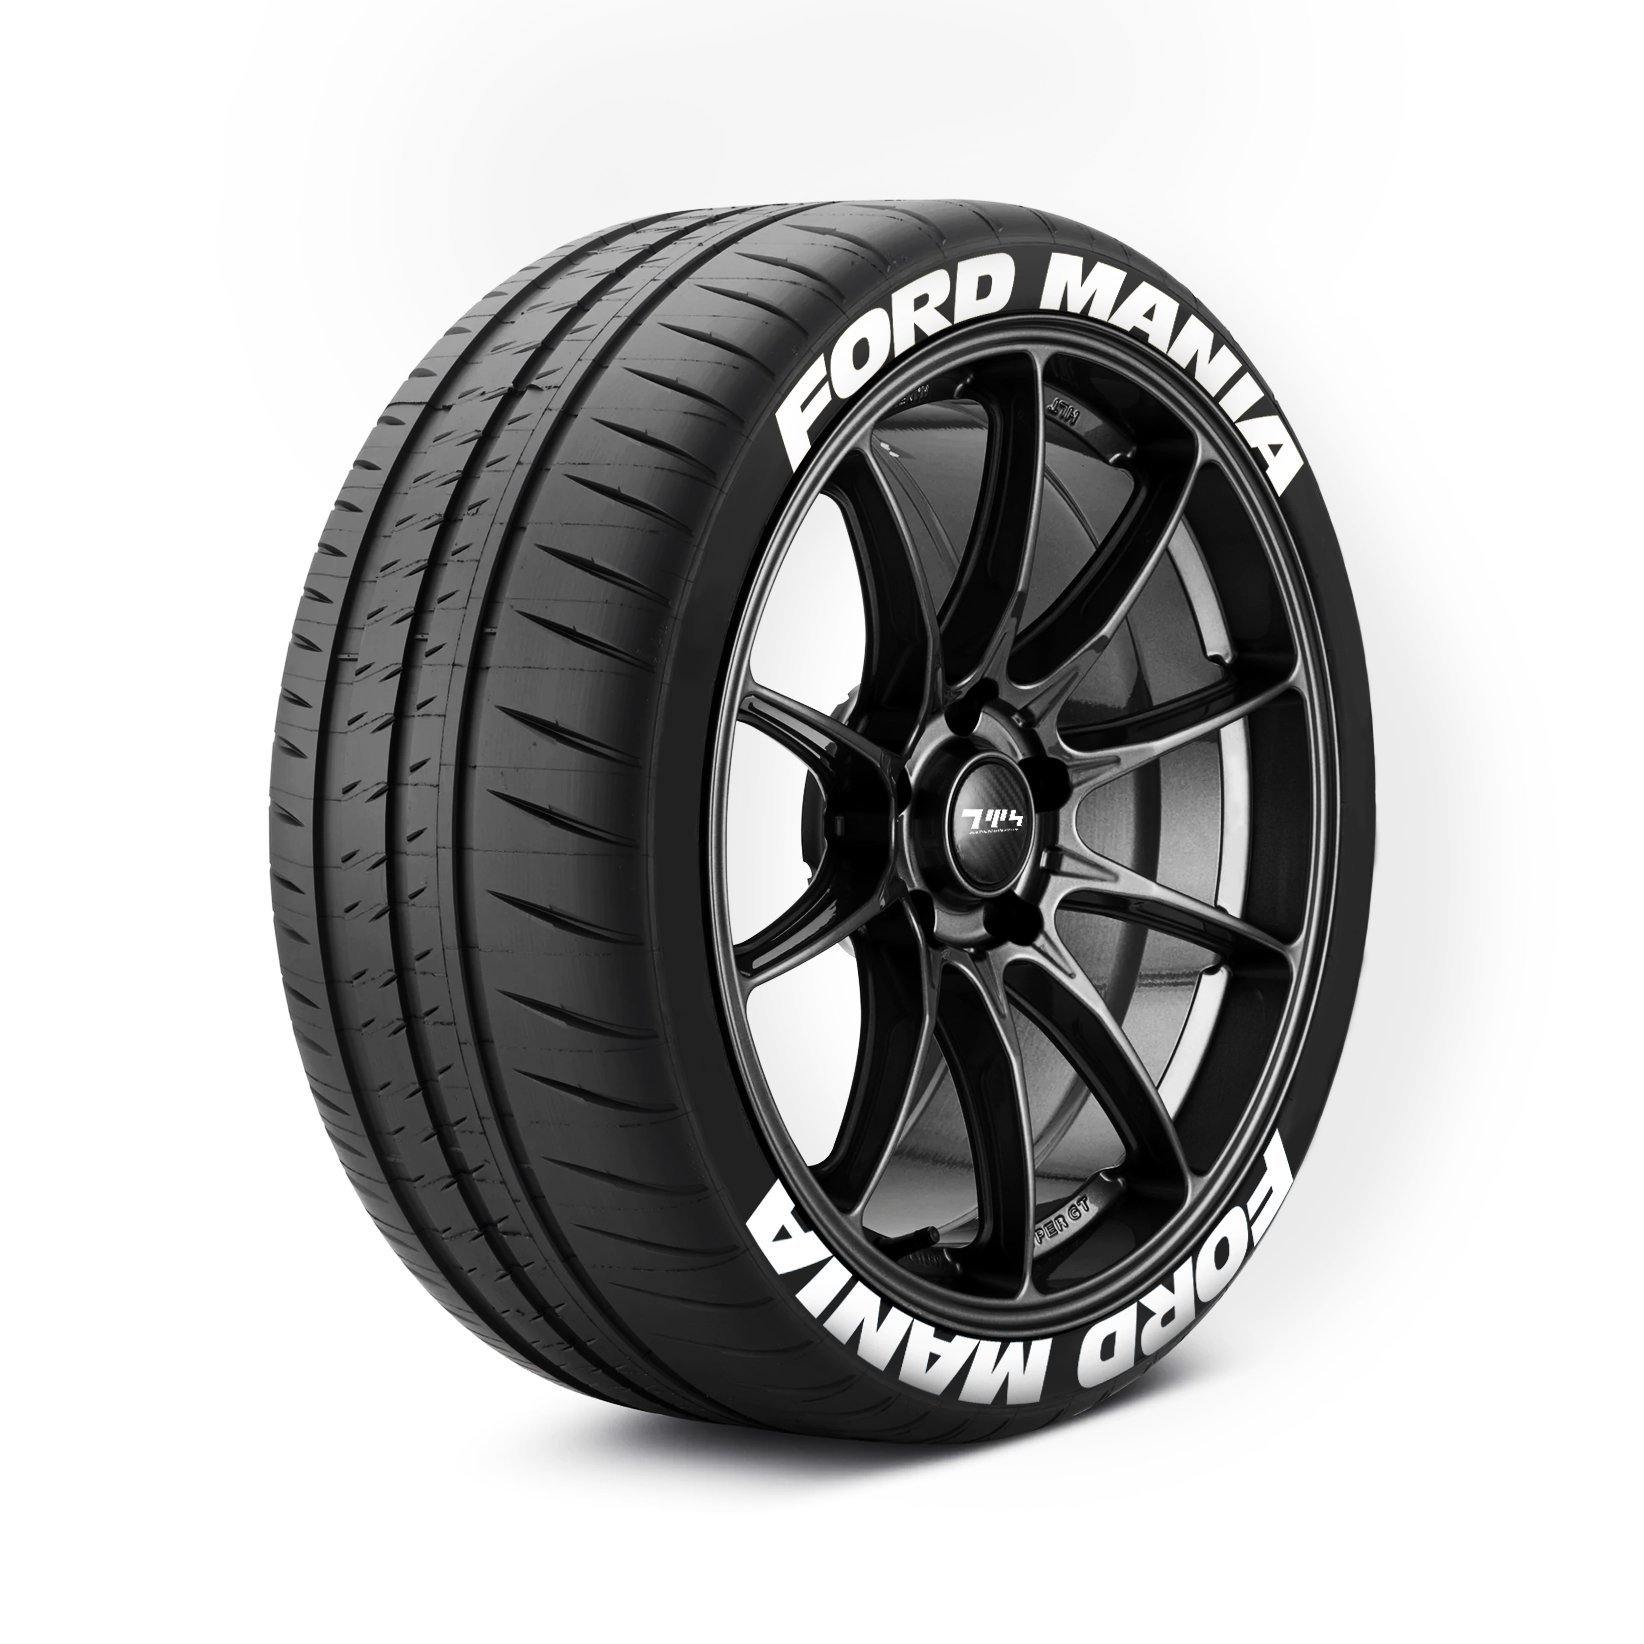 Ford Mania Tyre Stickers - Tyre Wall Stickers